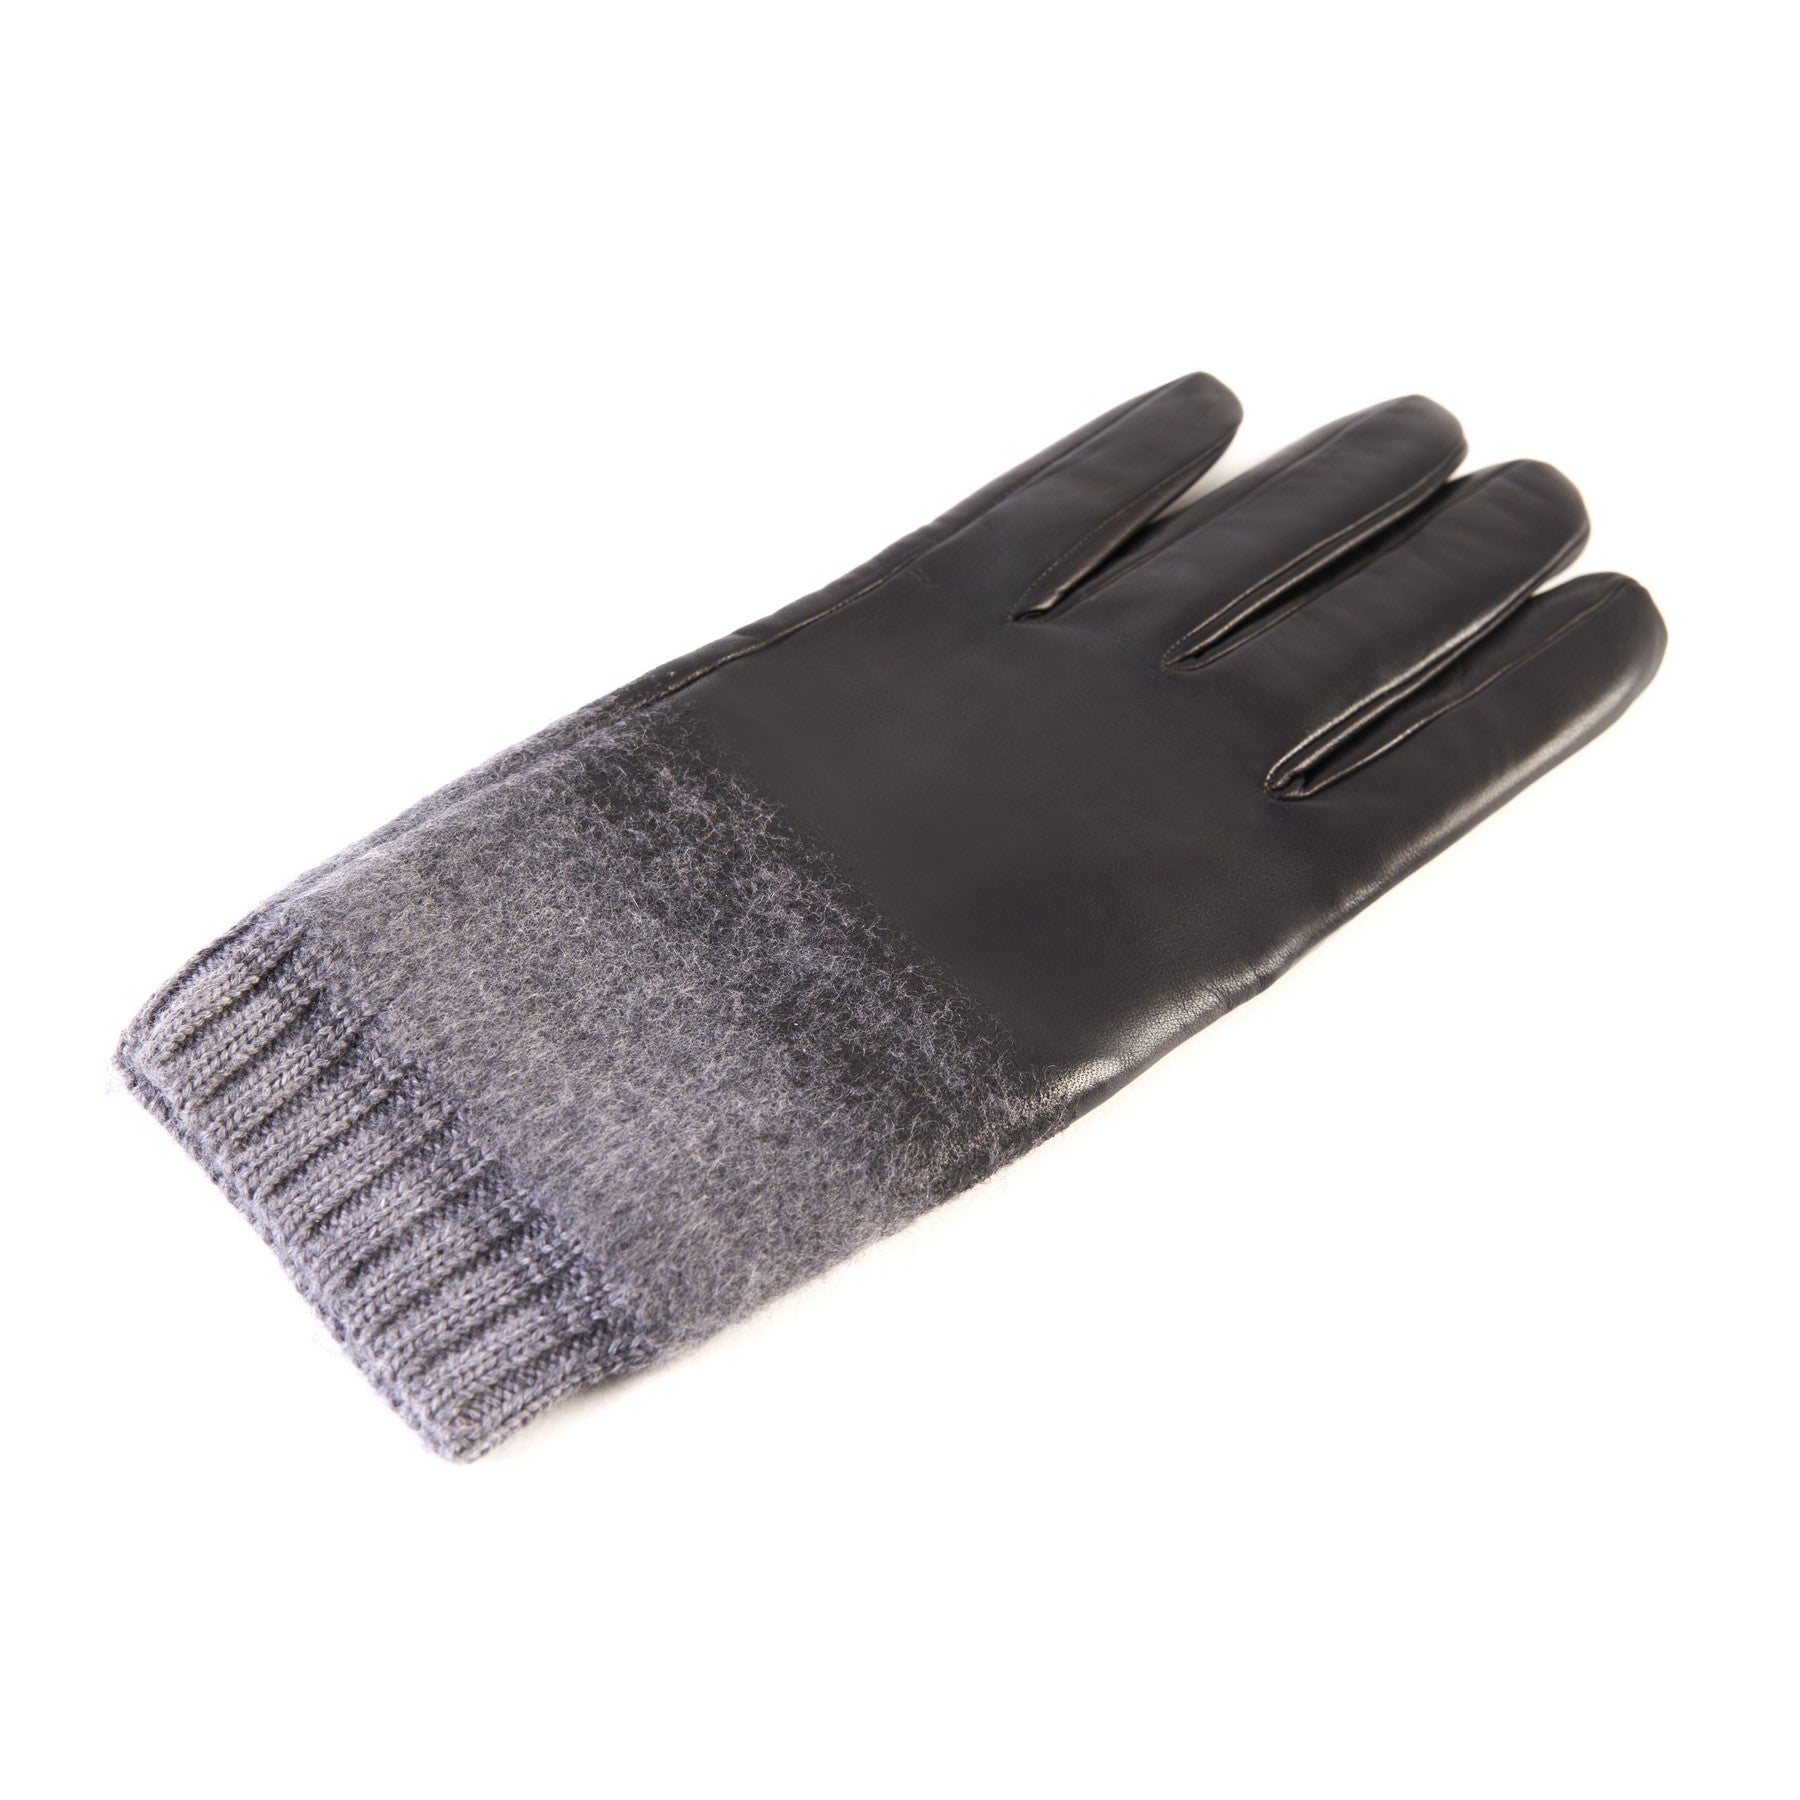 Men's black nappa leather gloves with wool needle punch details